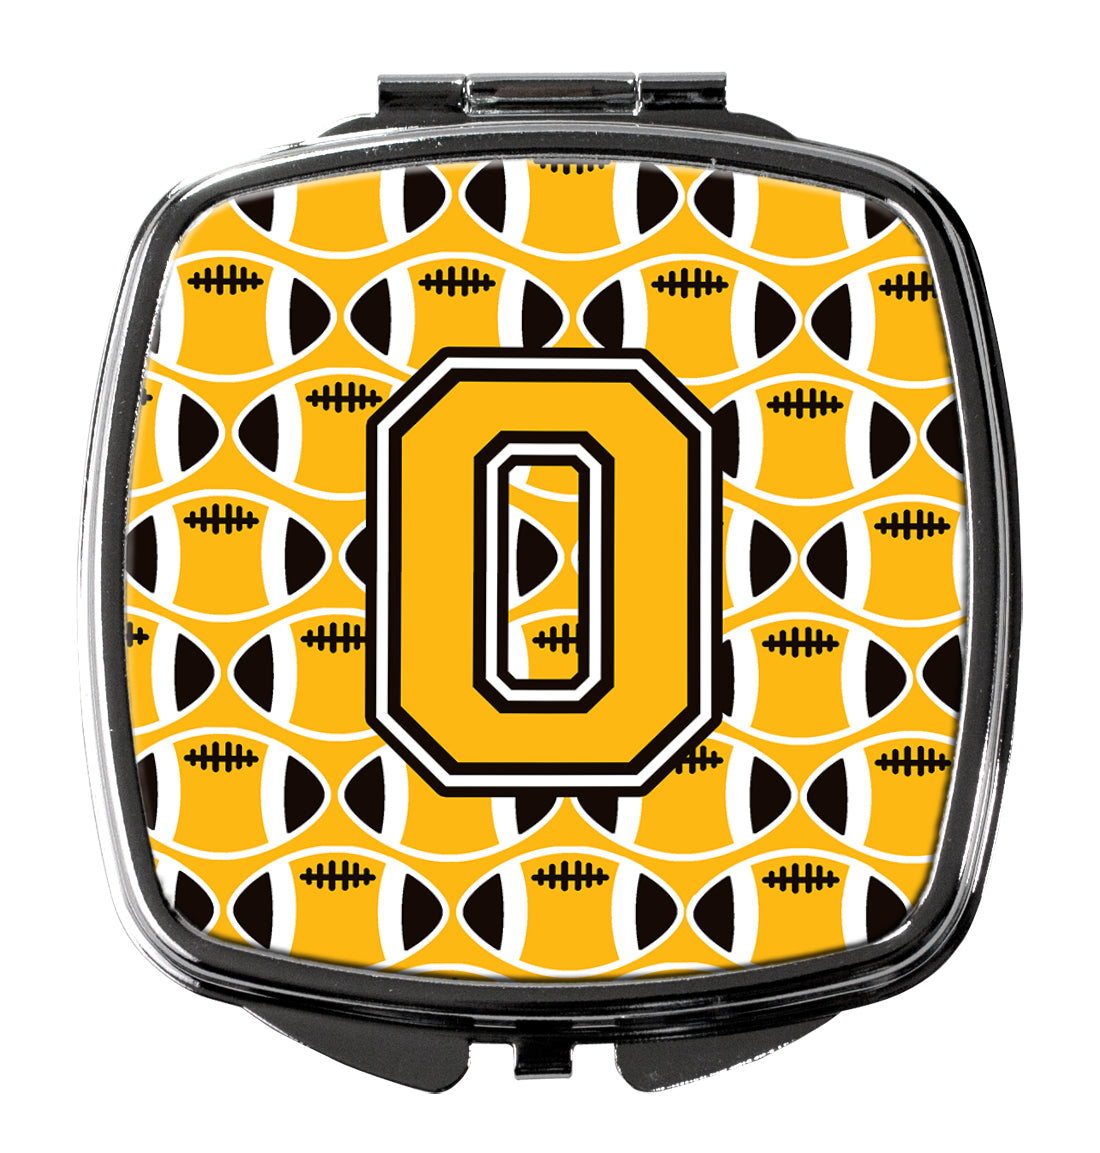 Letter O Football Black, Old Gold and White Compact Mirror CJ1080-OSCM  the-store.com.